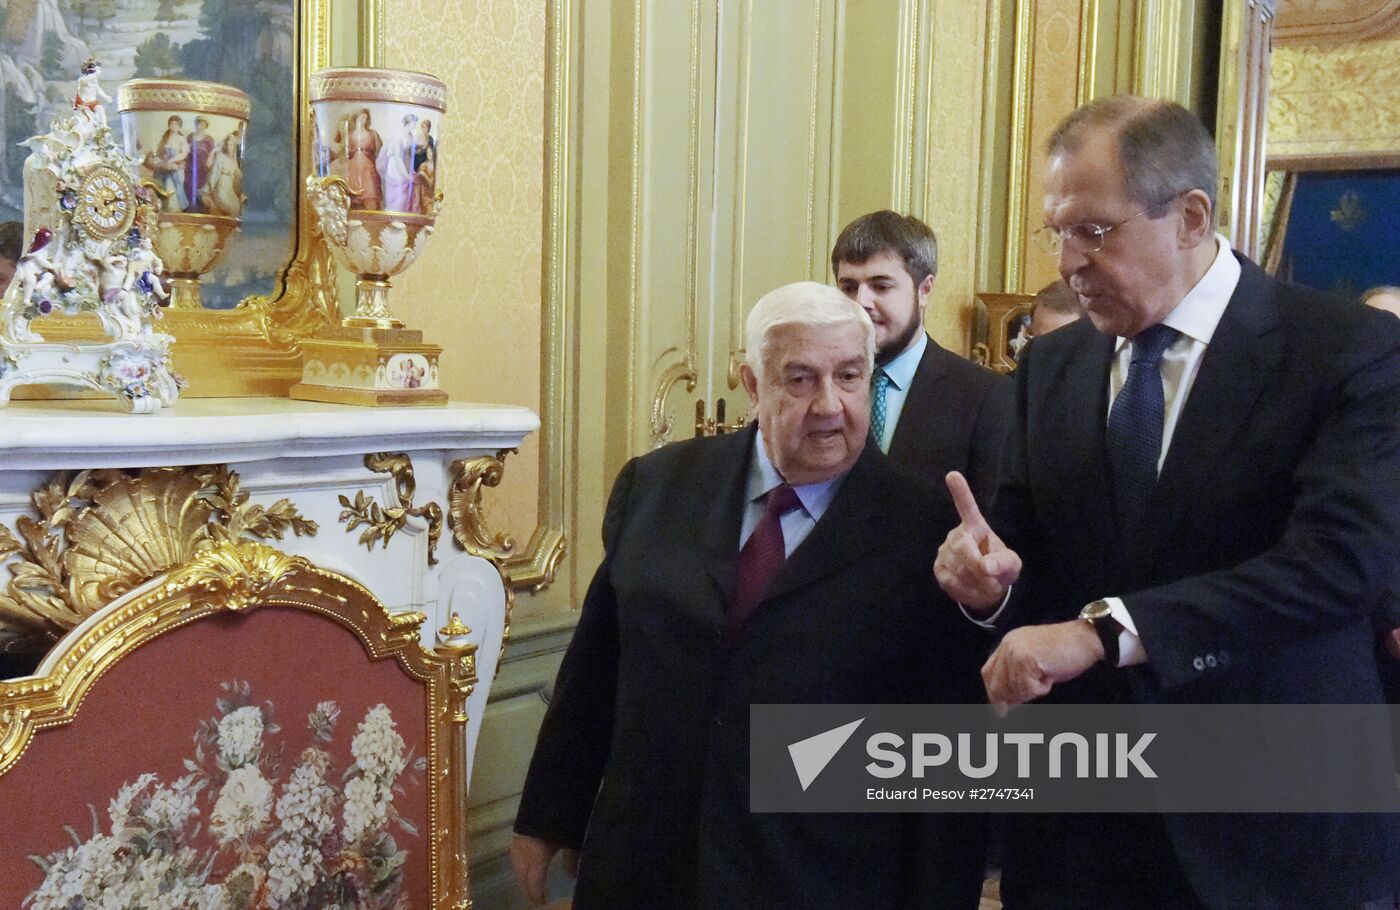 Foreign Minister Sergei Lavrov meets with Syrian counterpart, Walid al-Muallem